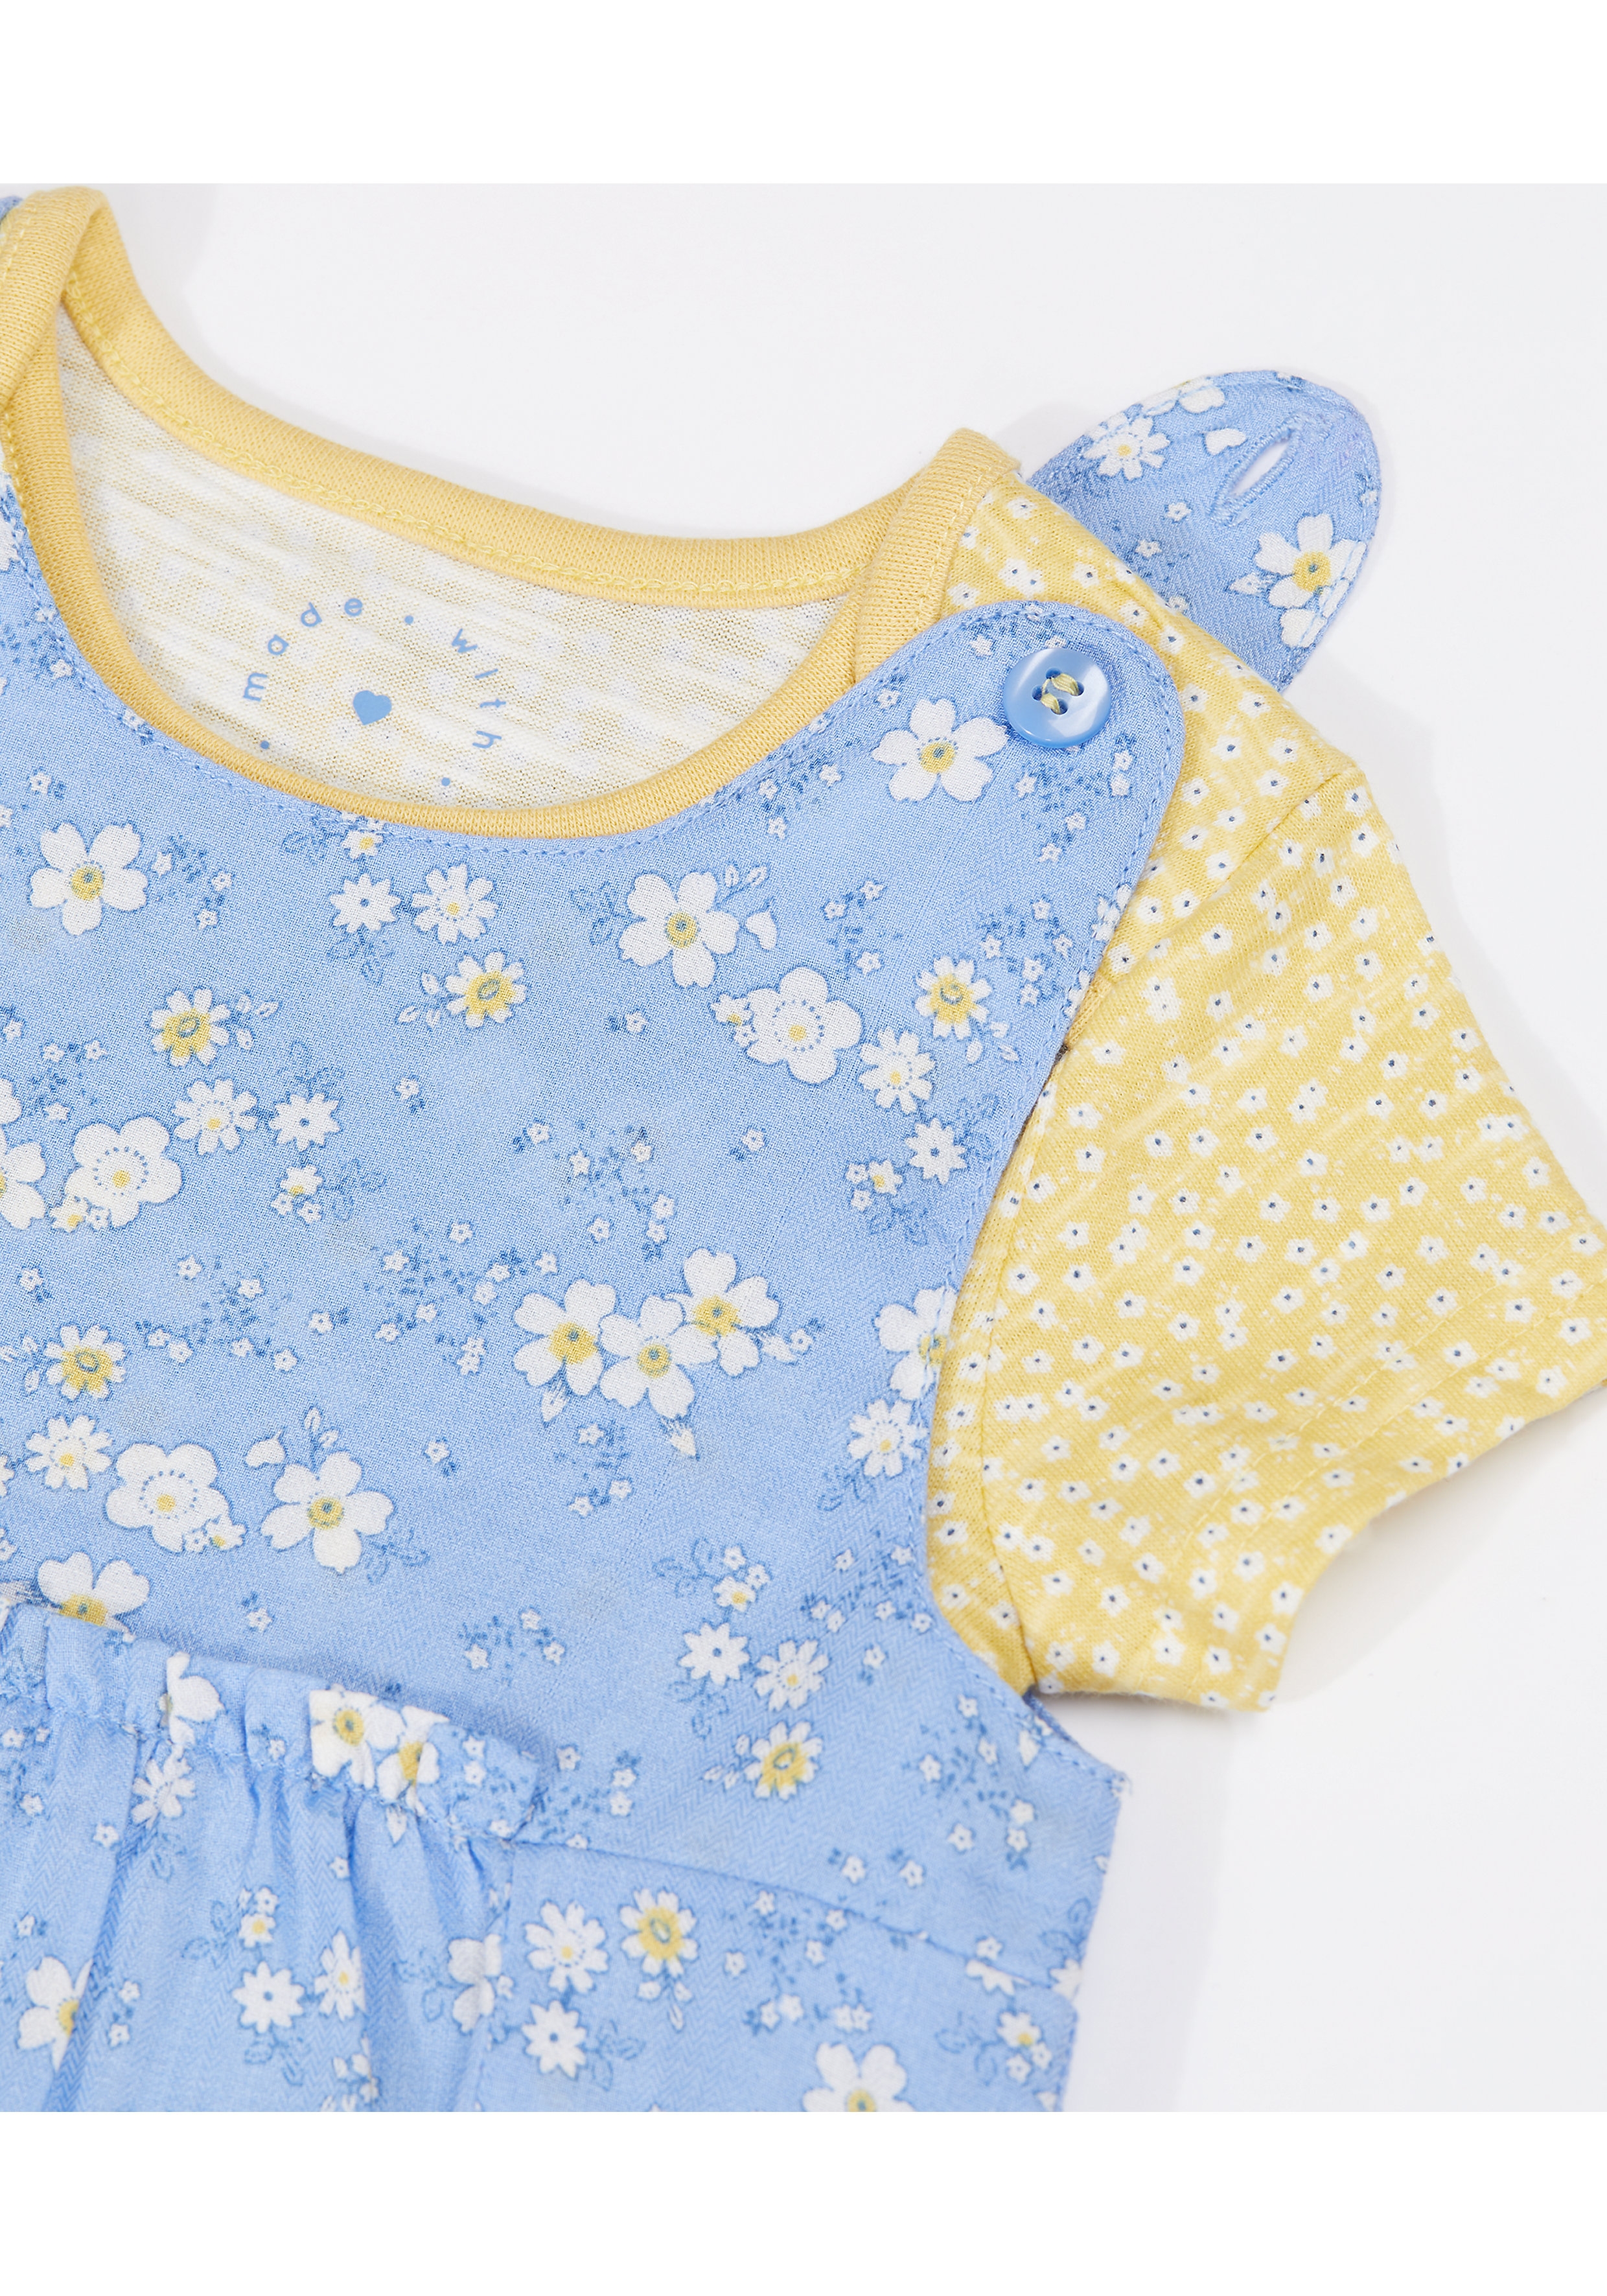 Mothercare | Girls Half Sleeves Dungaree Set Floral Print - Blue Yellow 2